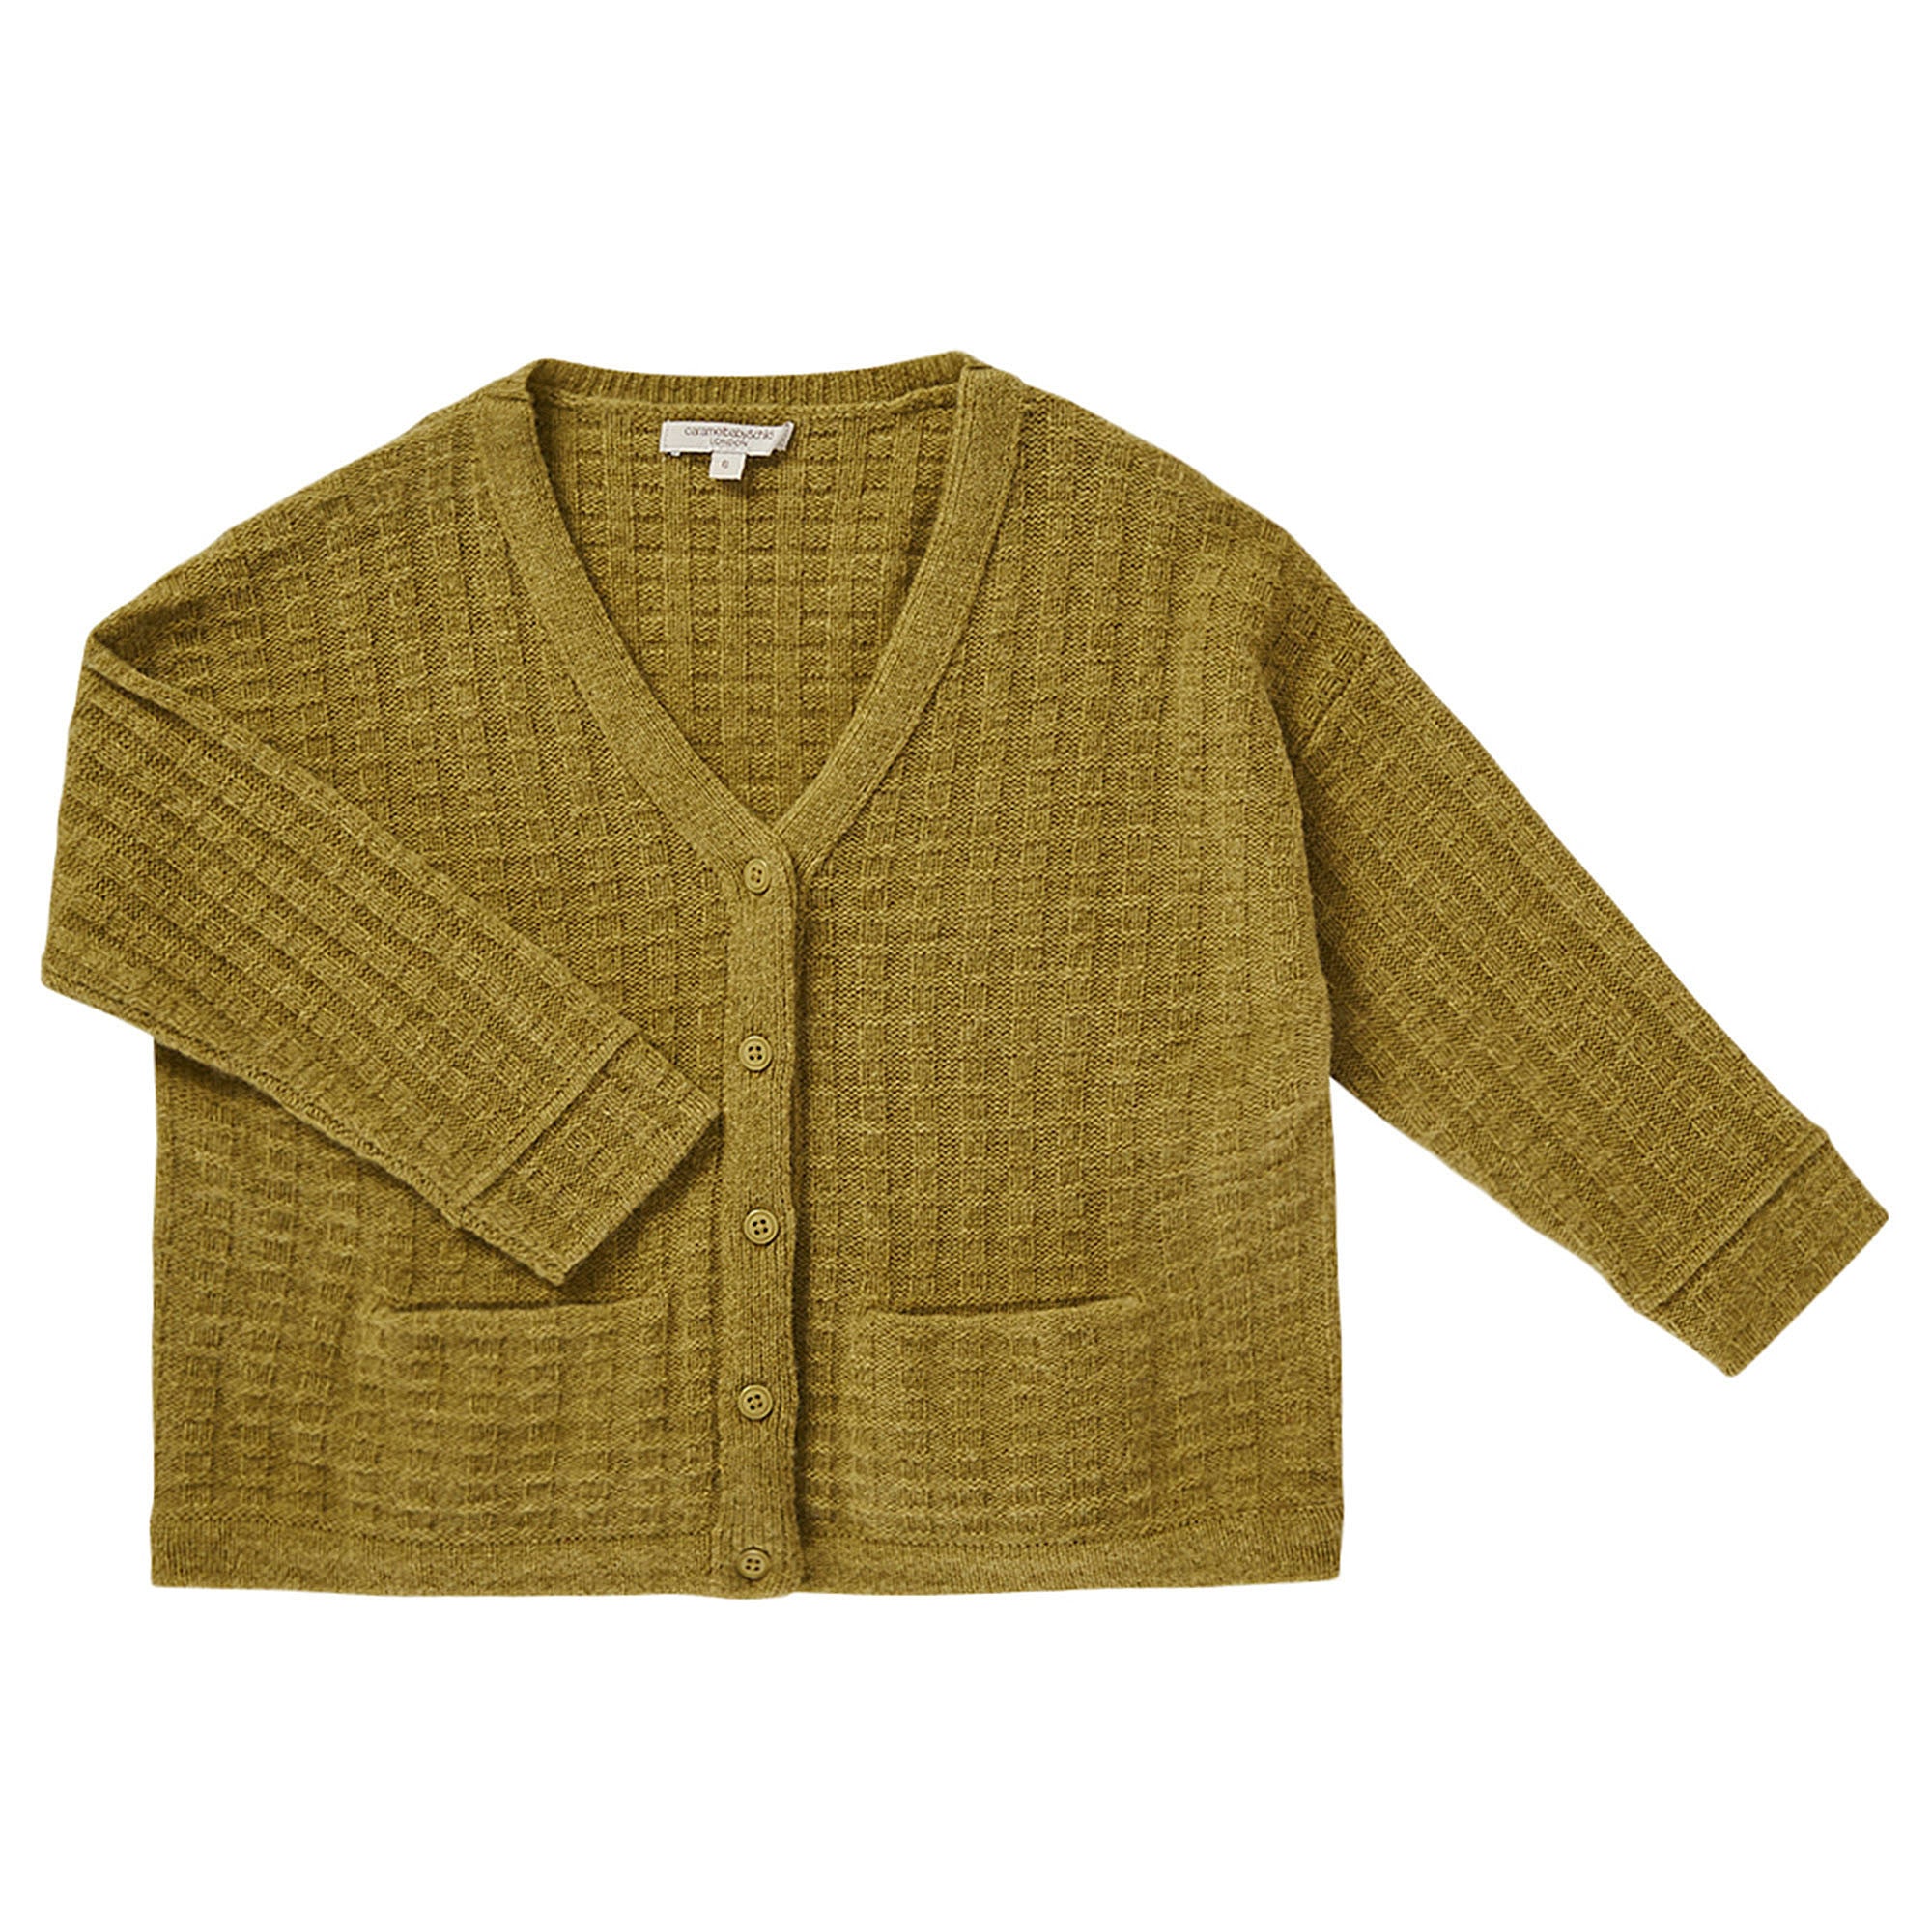 Boys Lime Knitted Wool Cardigans With Patch Pocket - CÉMAROSE | Children's Fashion Store - 1